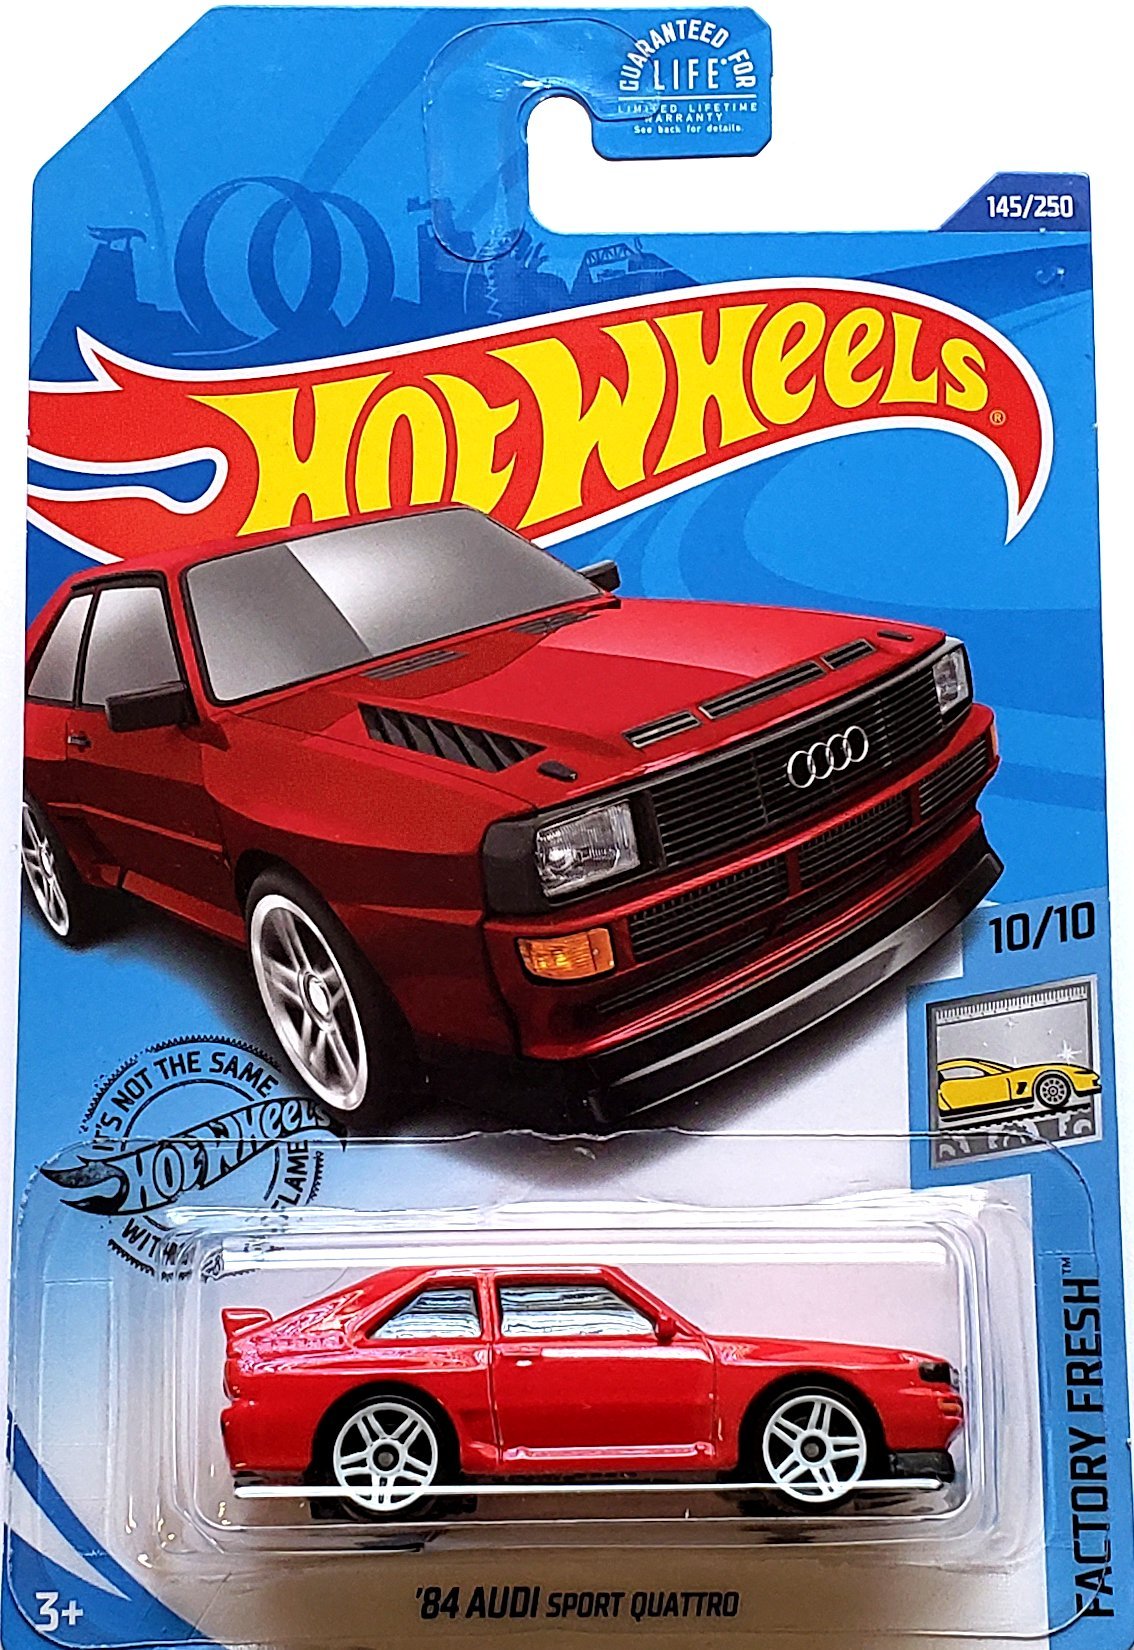 2021 Hot Wheels Mainline #057 - BMW M3 GT2 Coupe (Red) GRX89